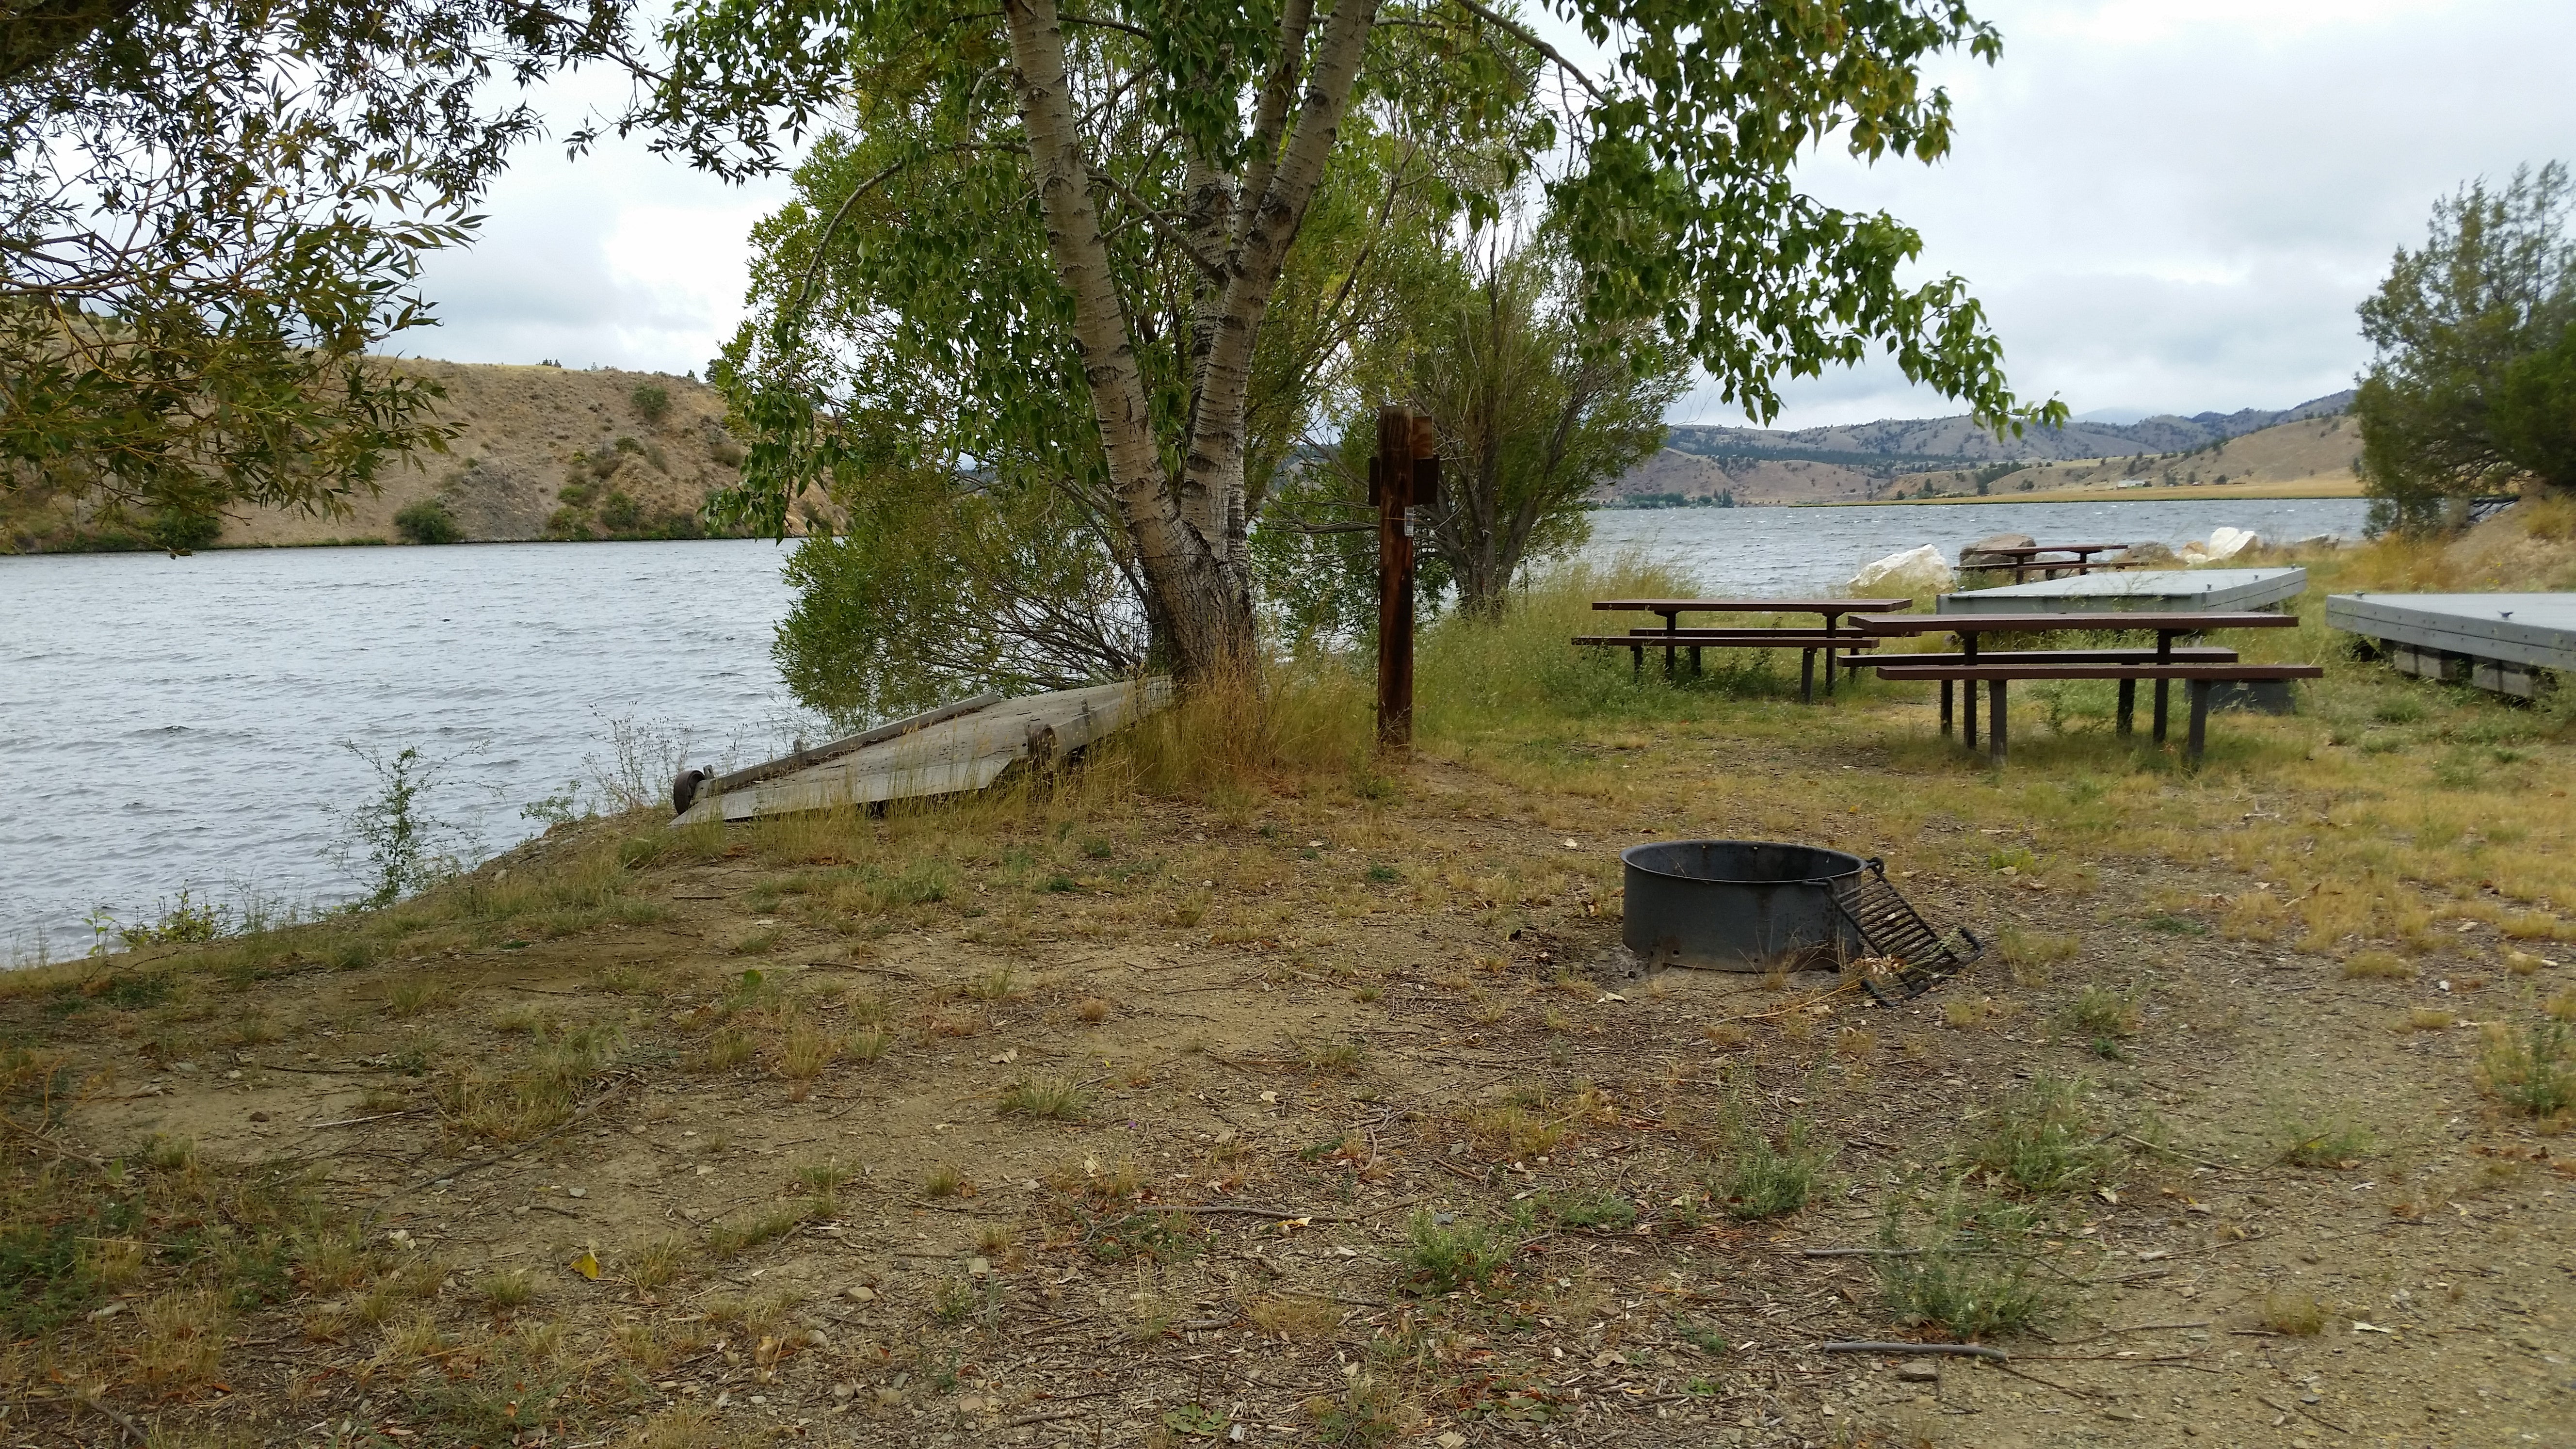 6th and 7th campsite.  Boat launch has been pulled off the lake for the season